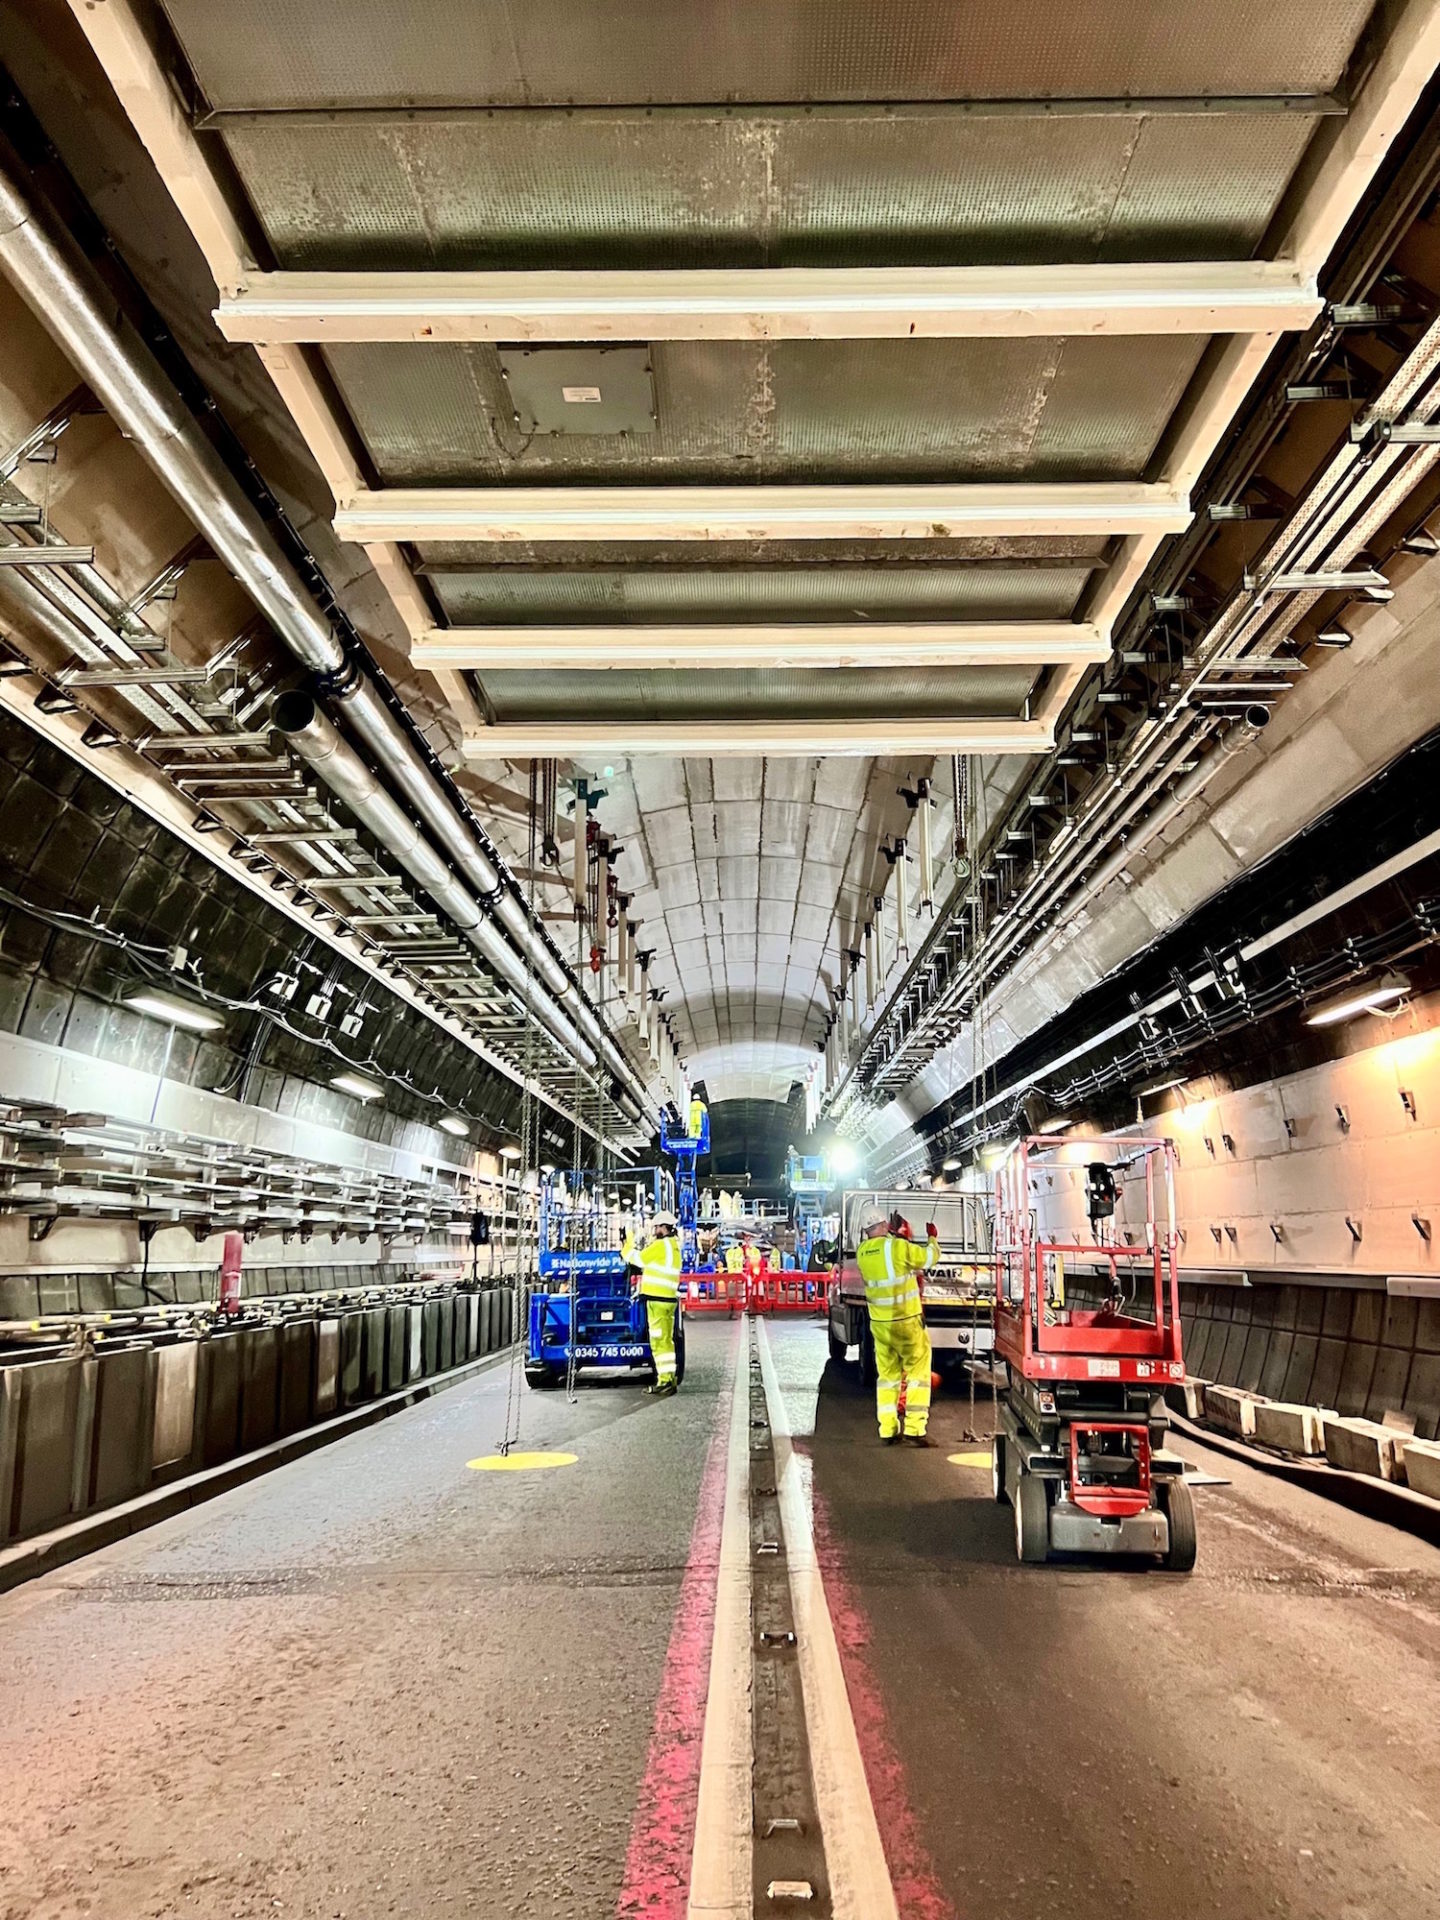 A shot of work going on in Heathrow's cargo tunnel for the Best Application of Technology shortlist